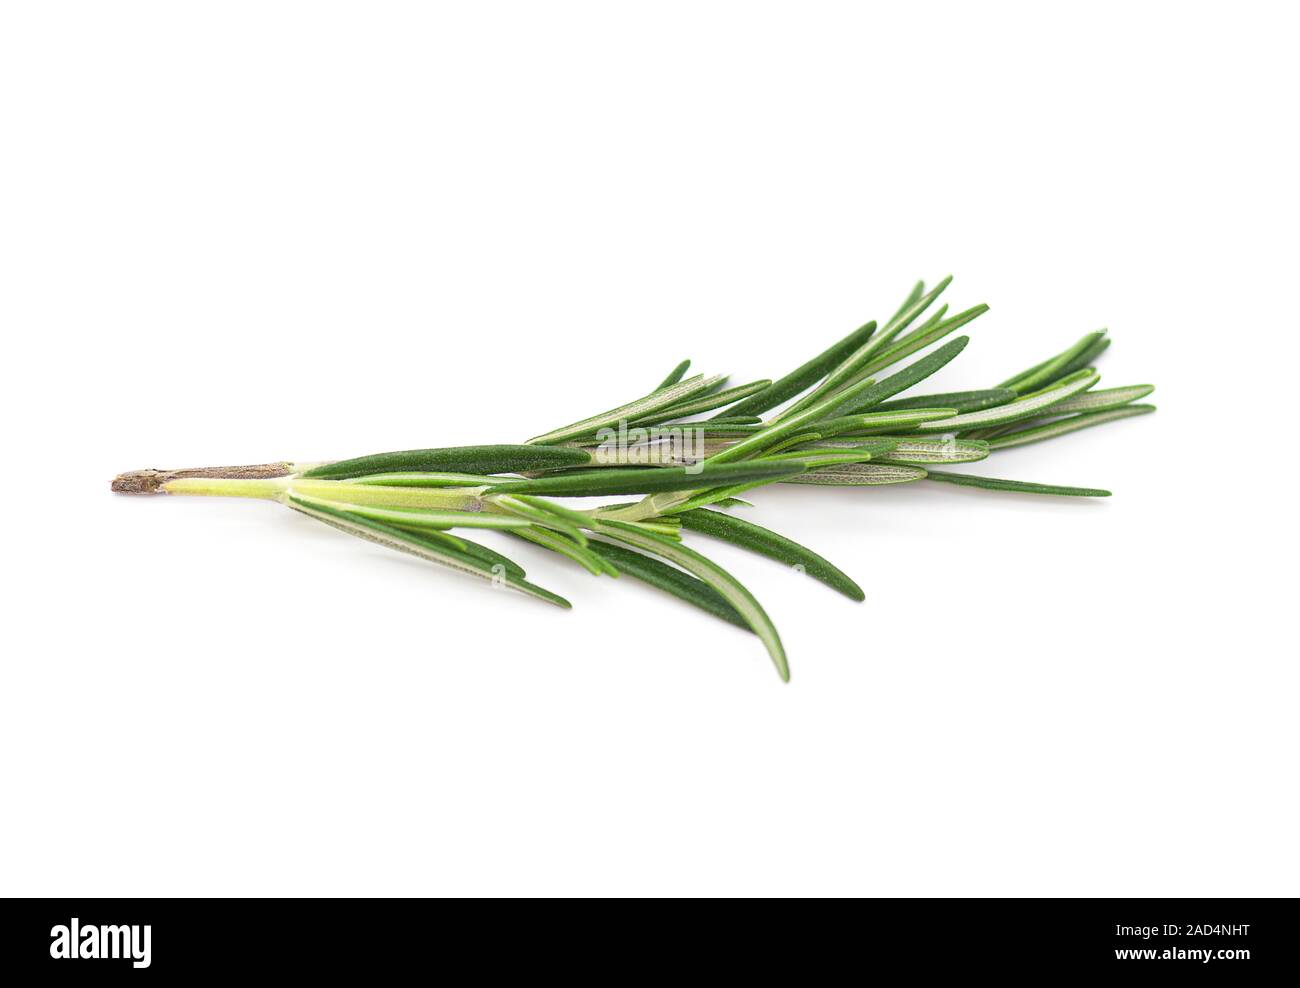 Rosemary, Rosemary Twig and Leaves isolated on white Background Stock Photo